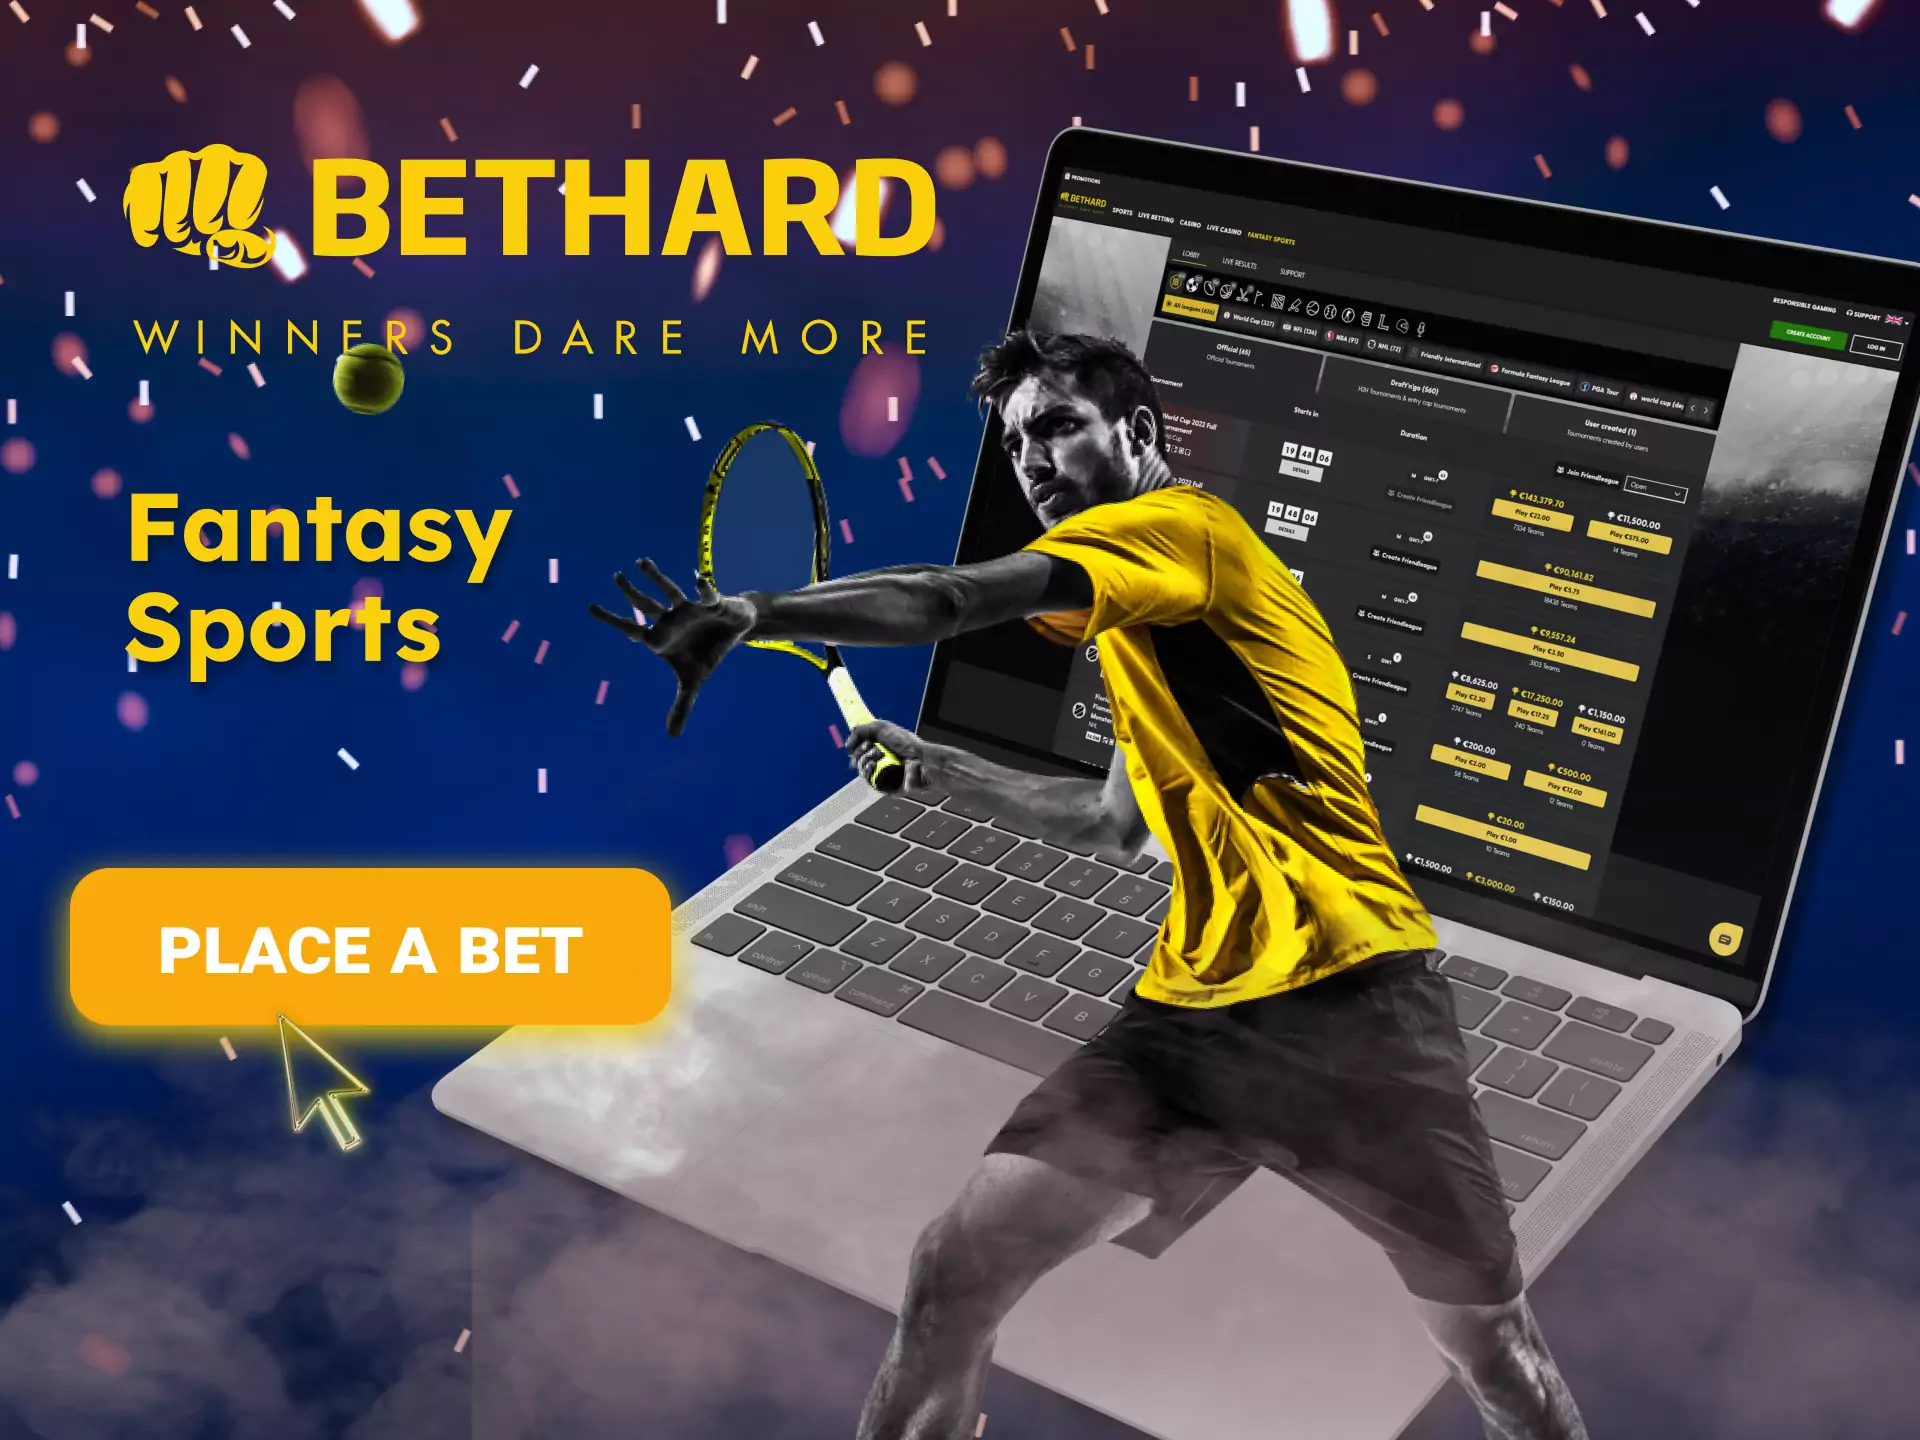 Bethard allows you to bet on fantasy sports.